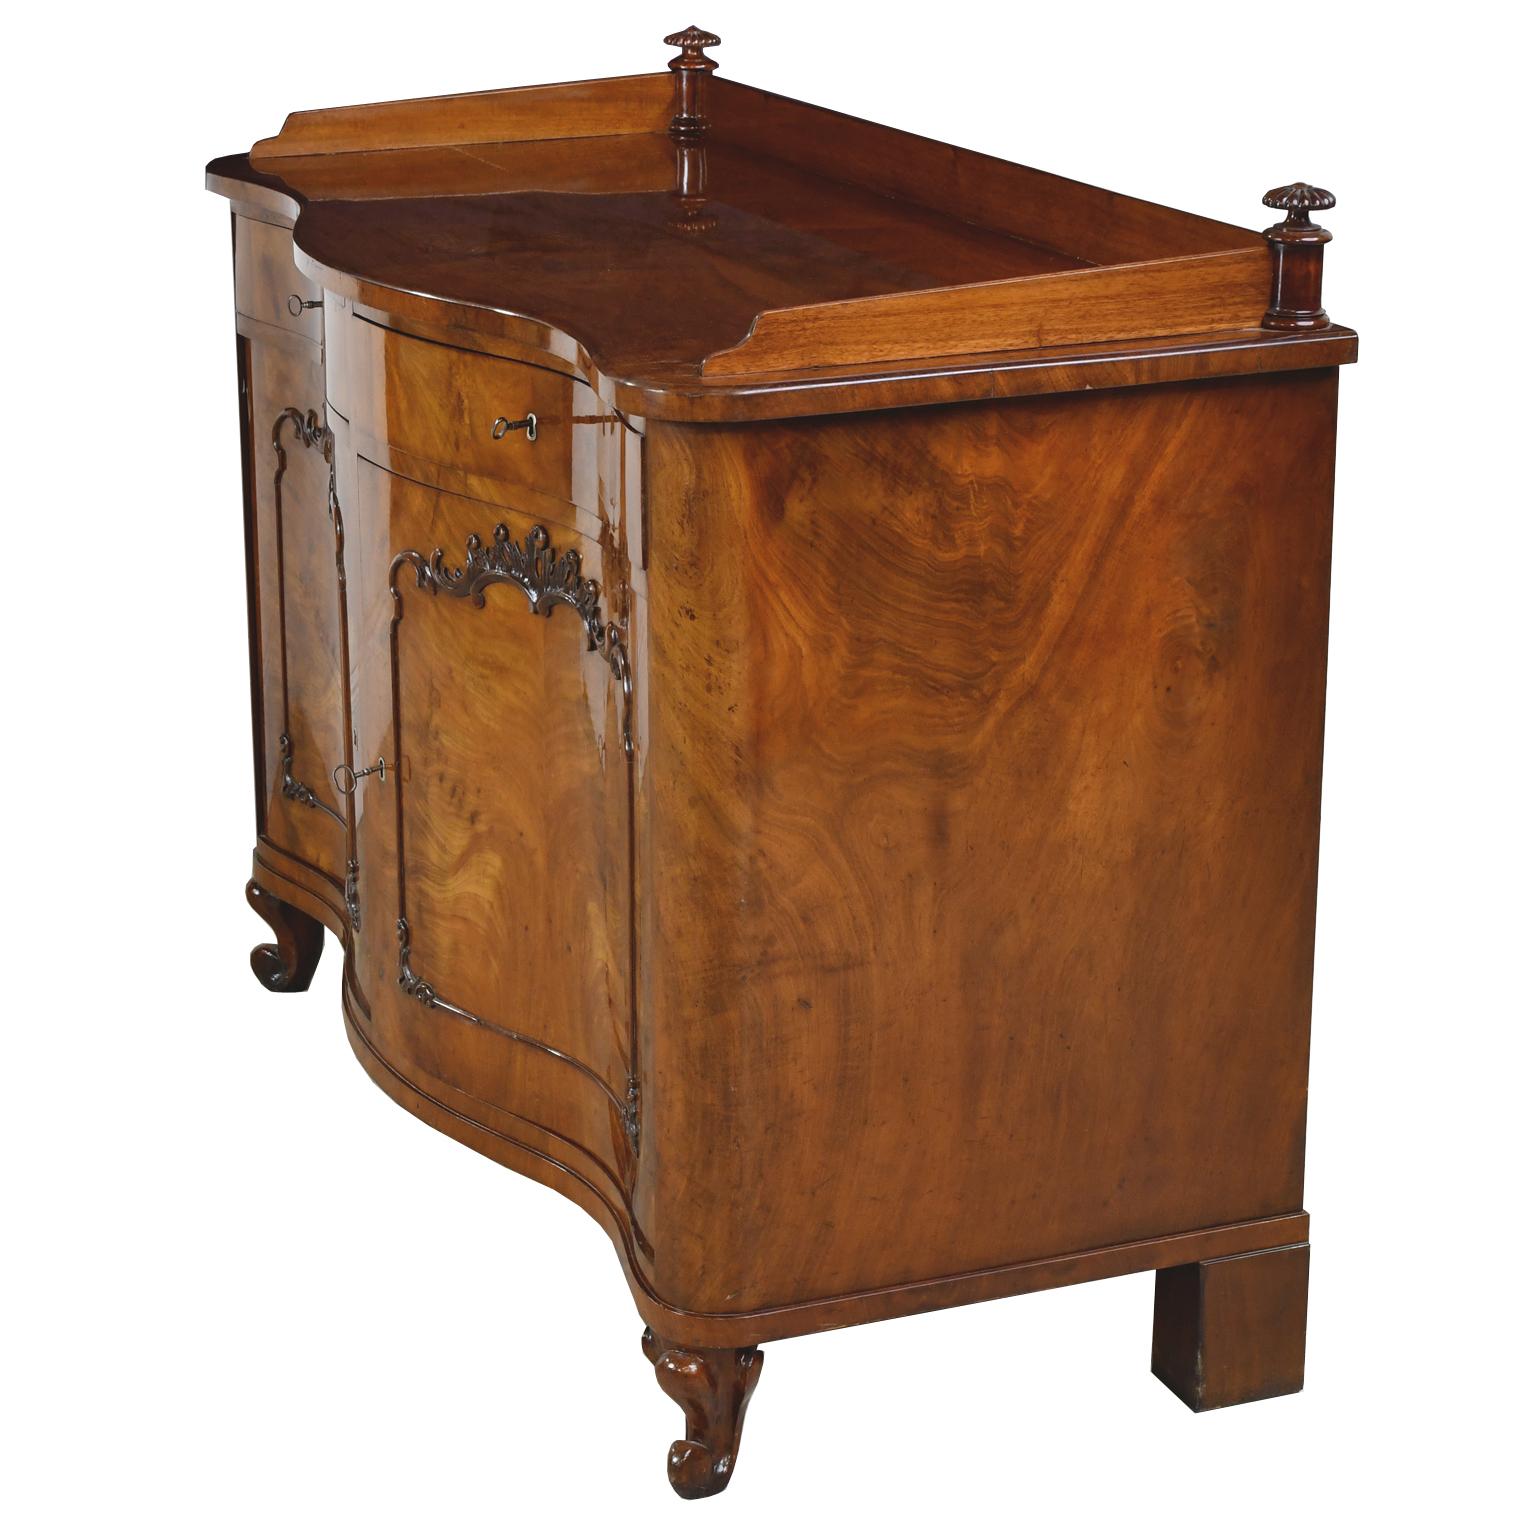 Rococo Revival Christian VIII Serpentine-Front Sideboard in West Indies Mahogany, circa 1850 For Sale